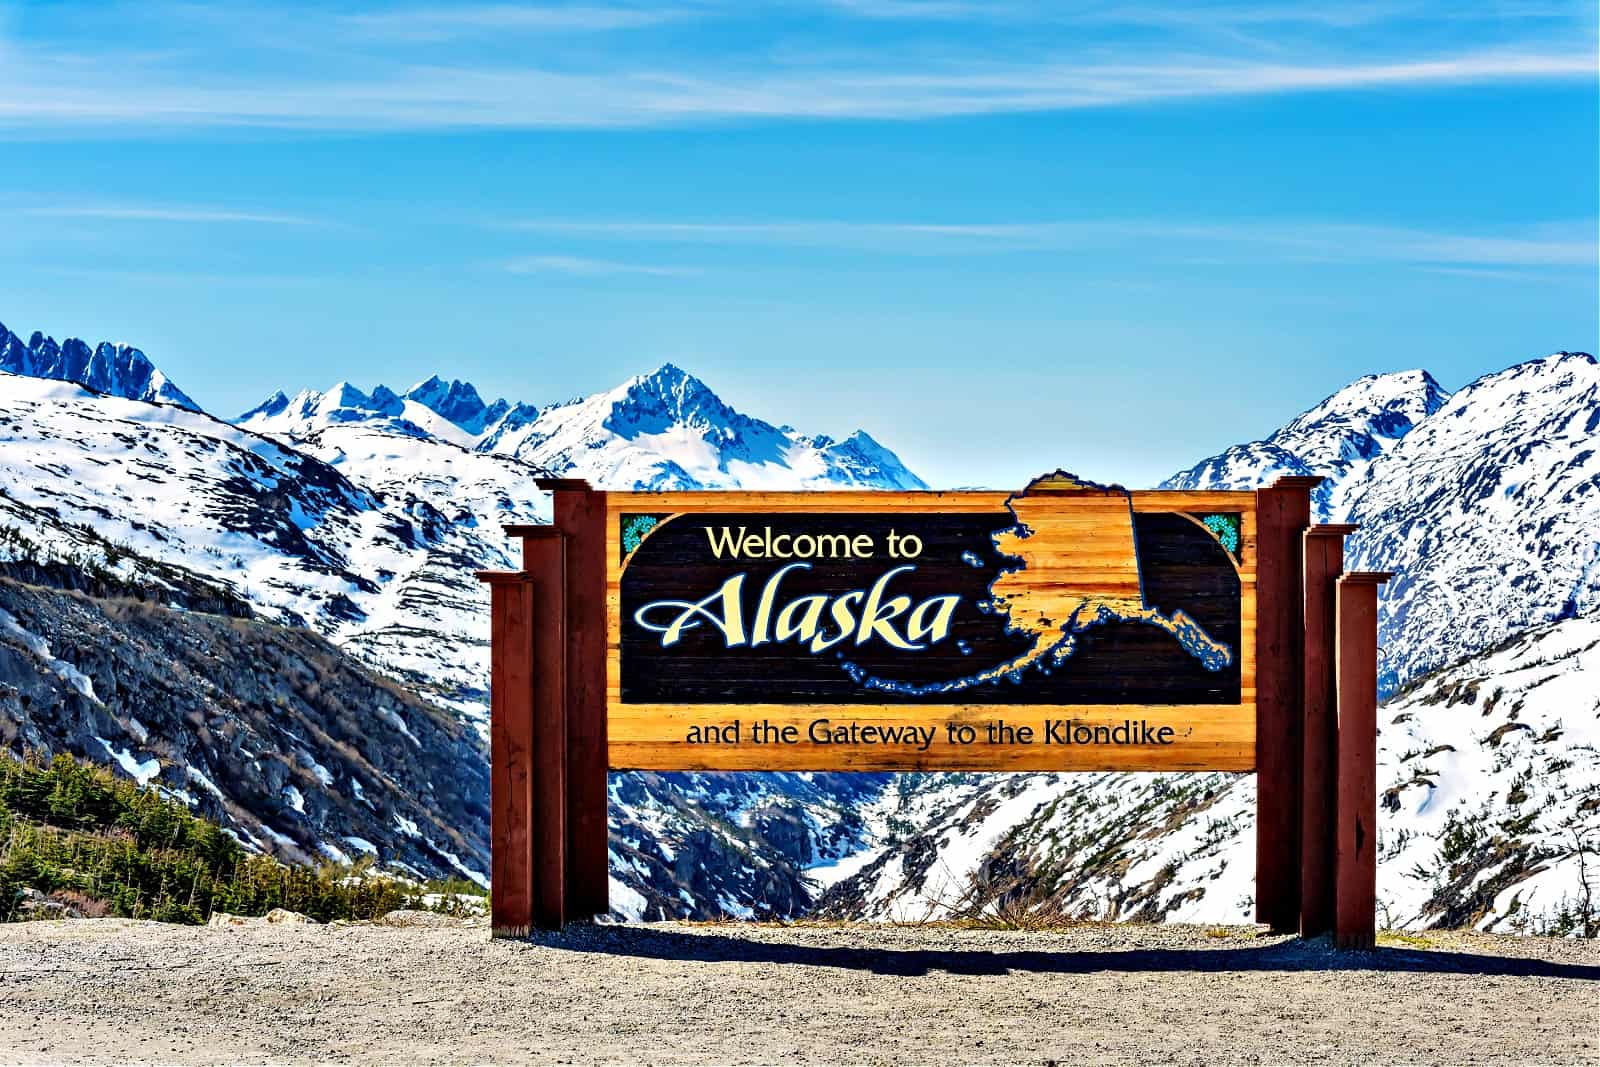 Alaska welcome sign with snow-capped mountains in the background